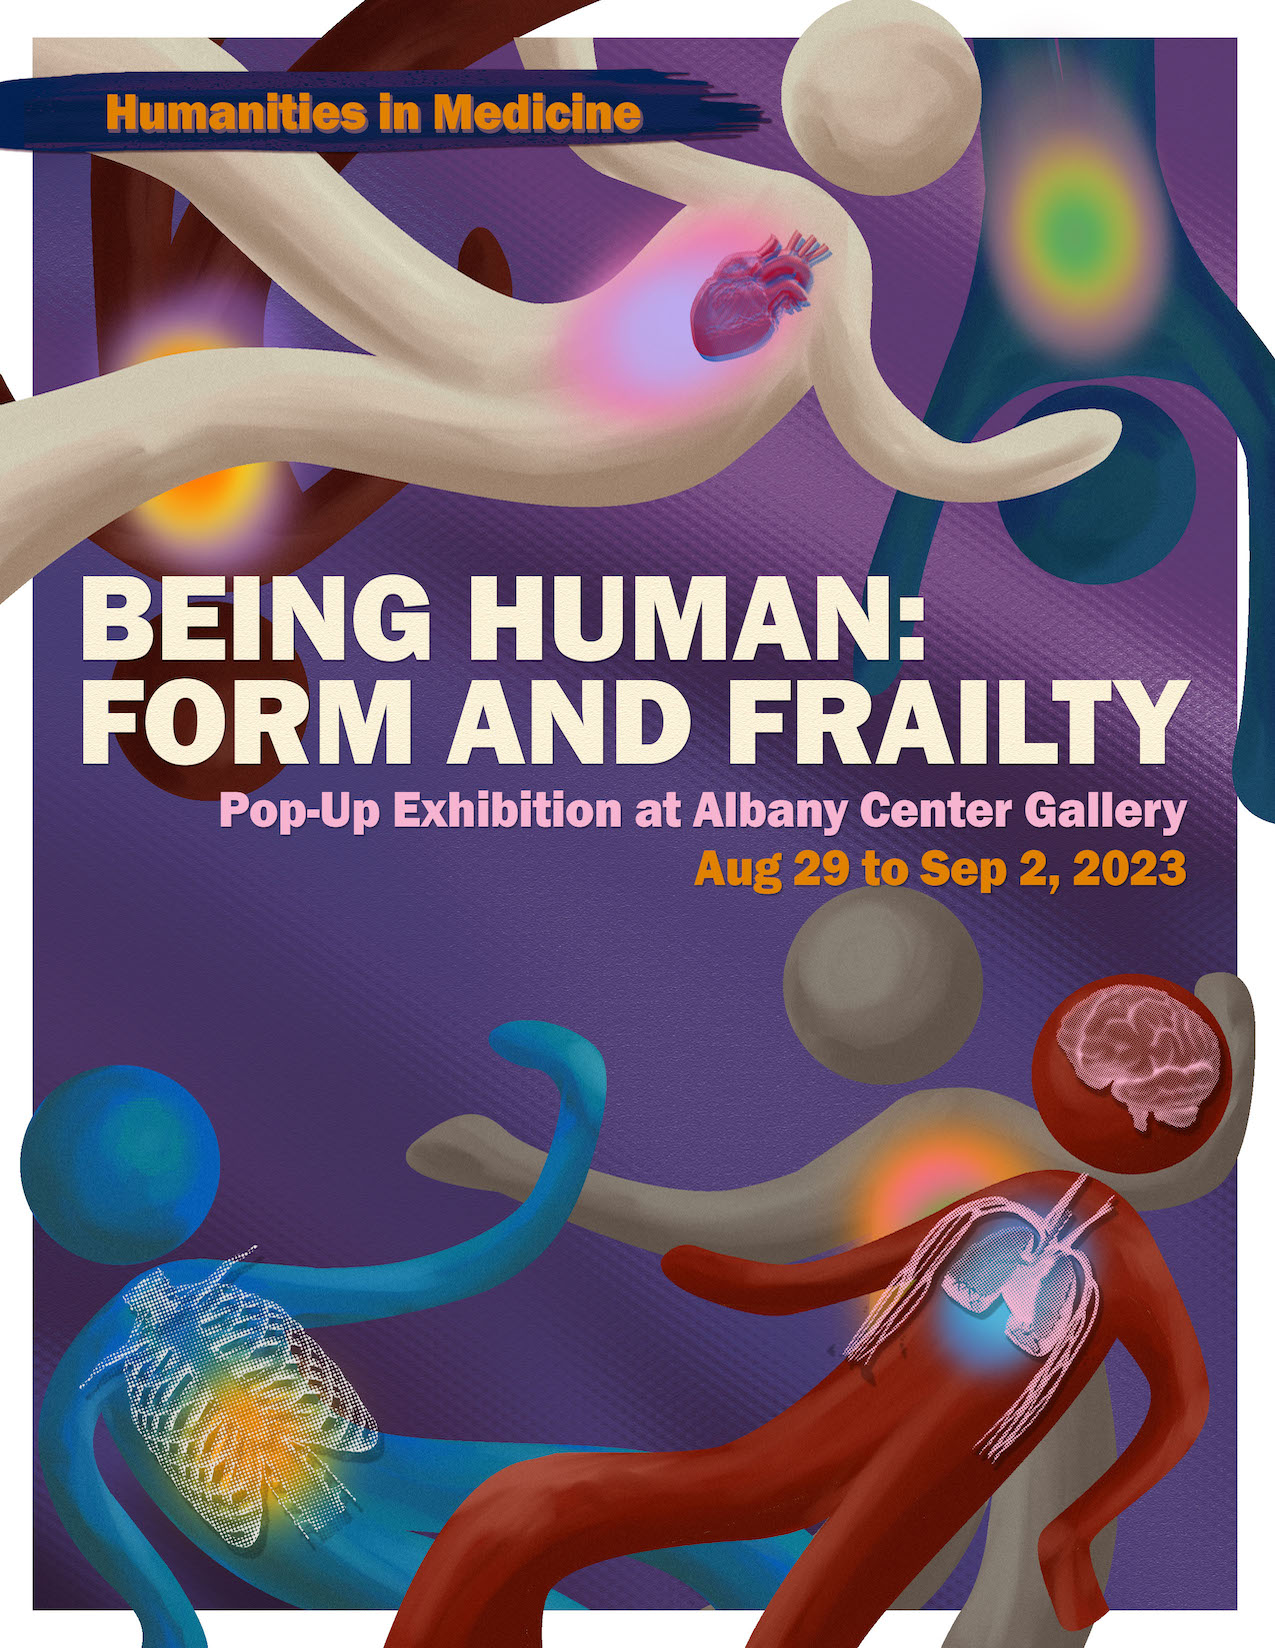 "Being Human: Form and Frailty" Pop-Up Exhibition